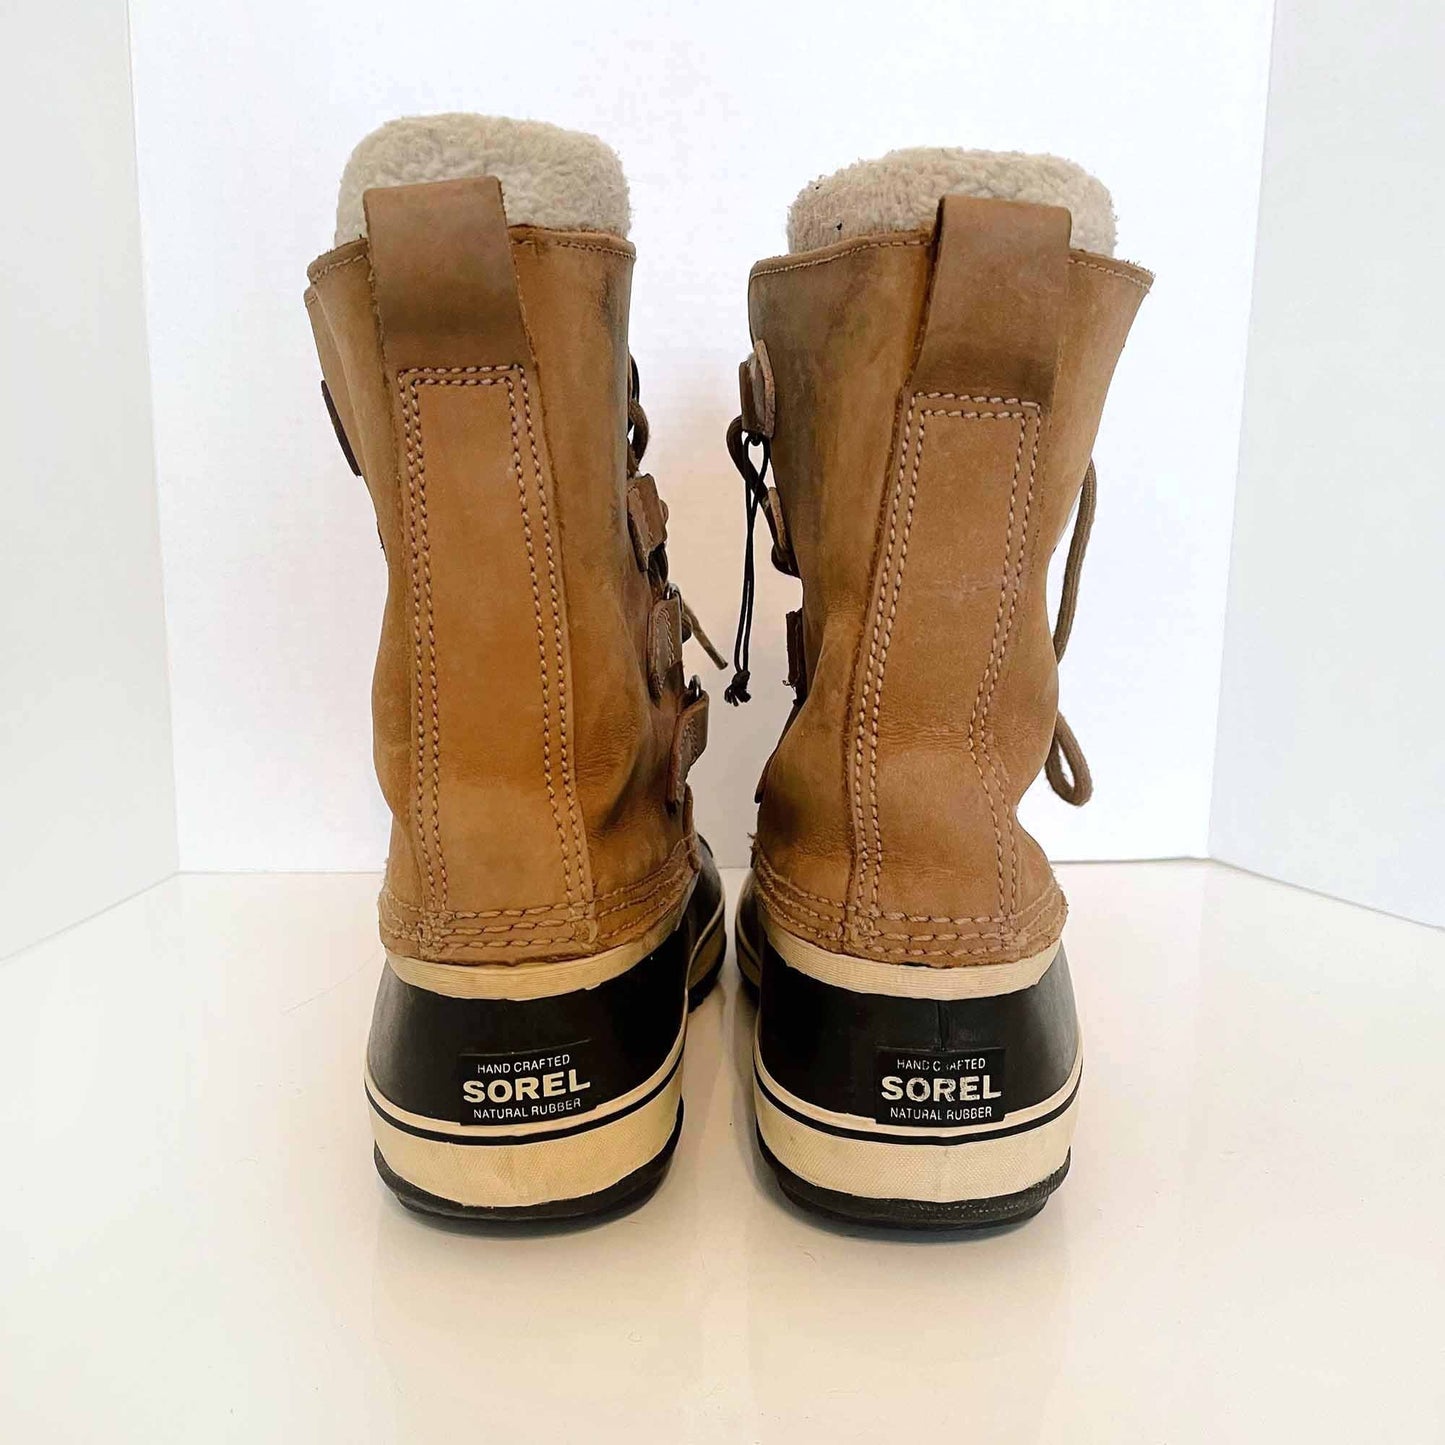 sorel 1964 pac waterproof leather snow boot - size 9.5 W